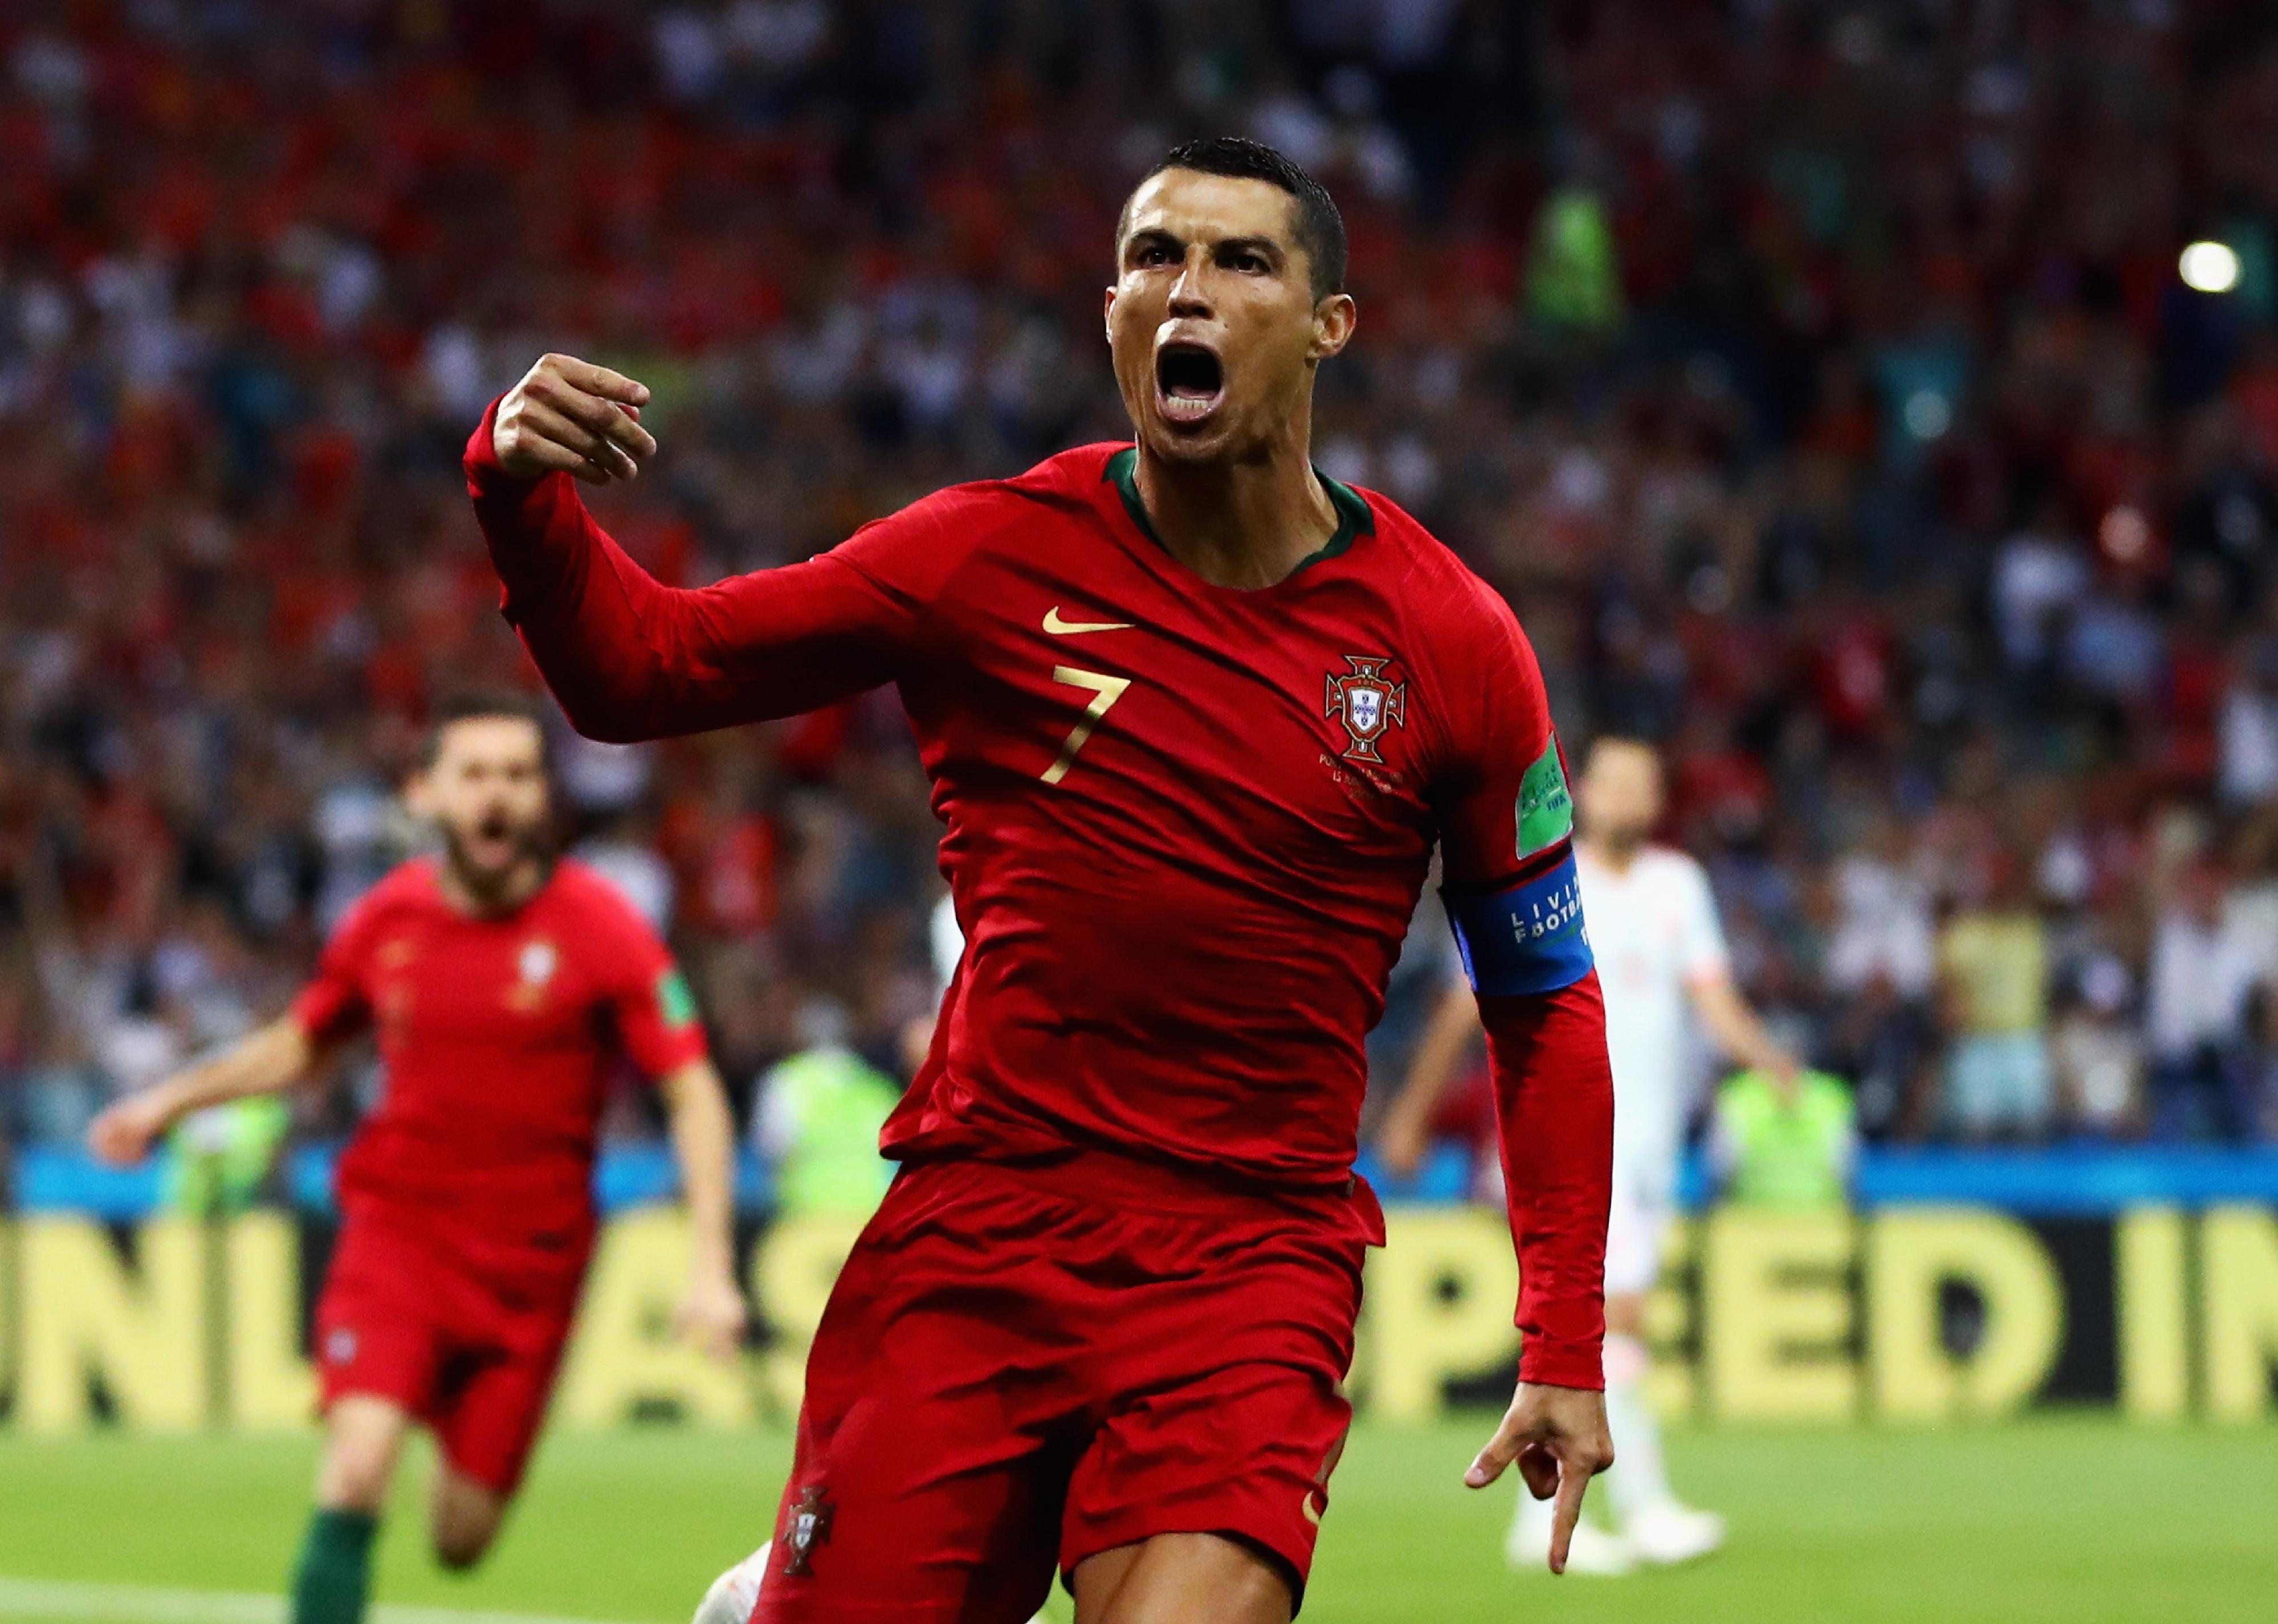 Cristiano Ronaldo of Portugal celebrates after scoring his team's first goal during the 2018 FIFA World Cup 